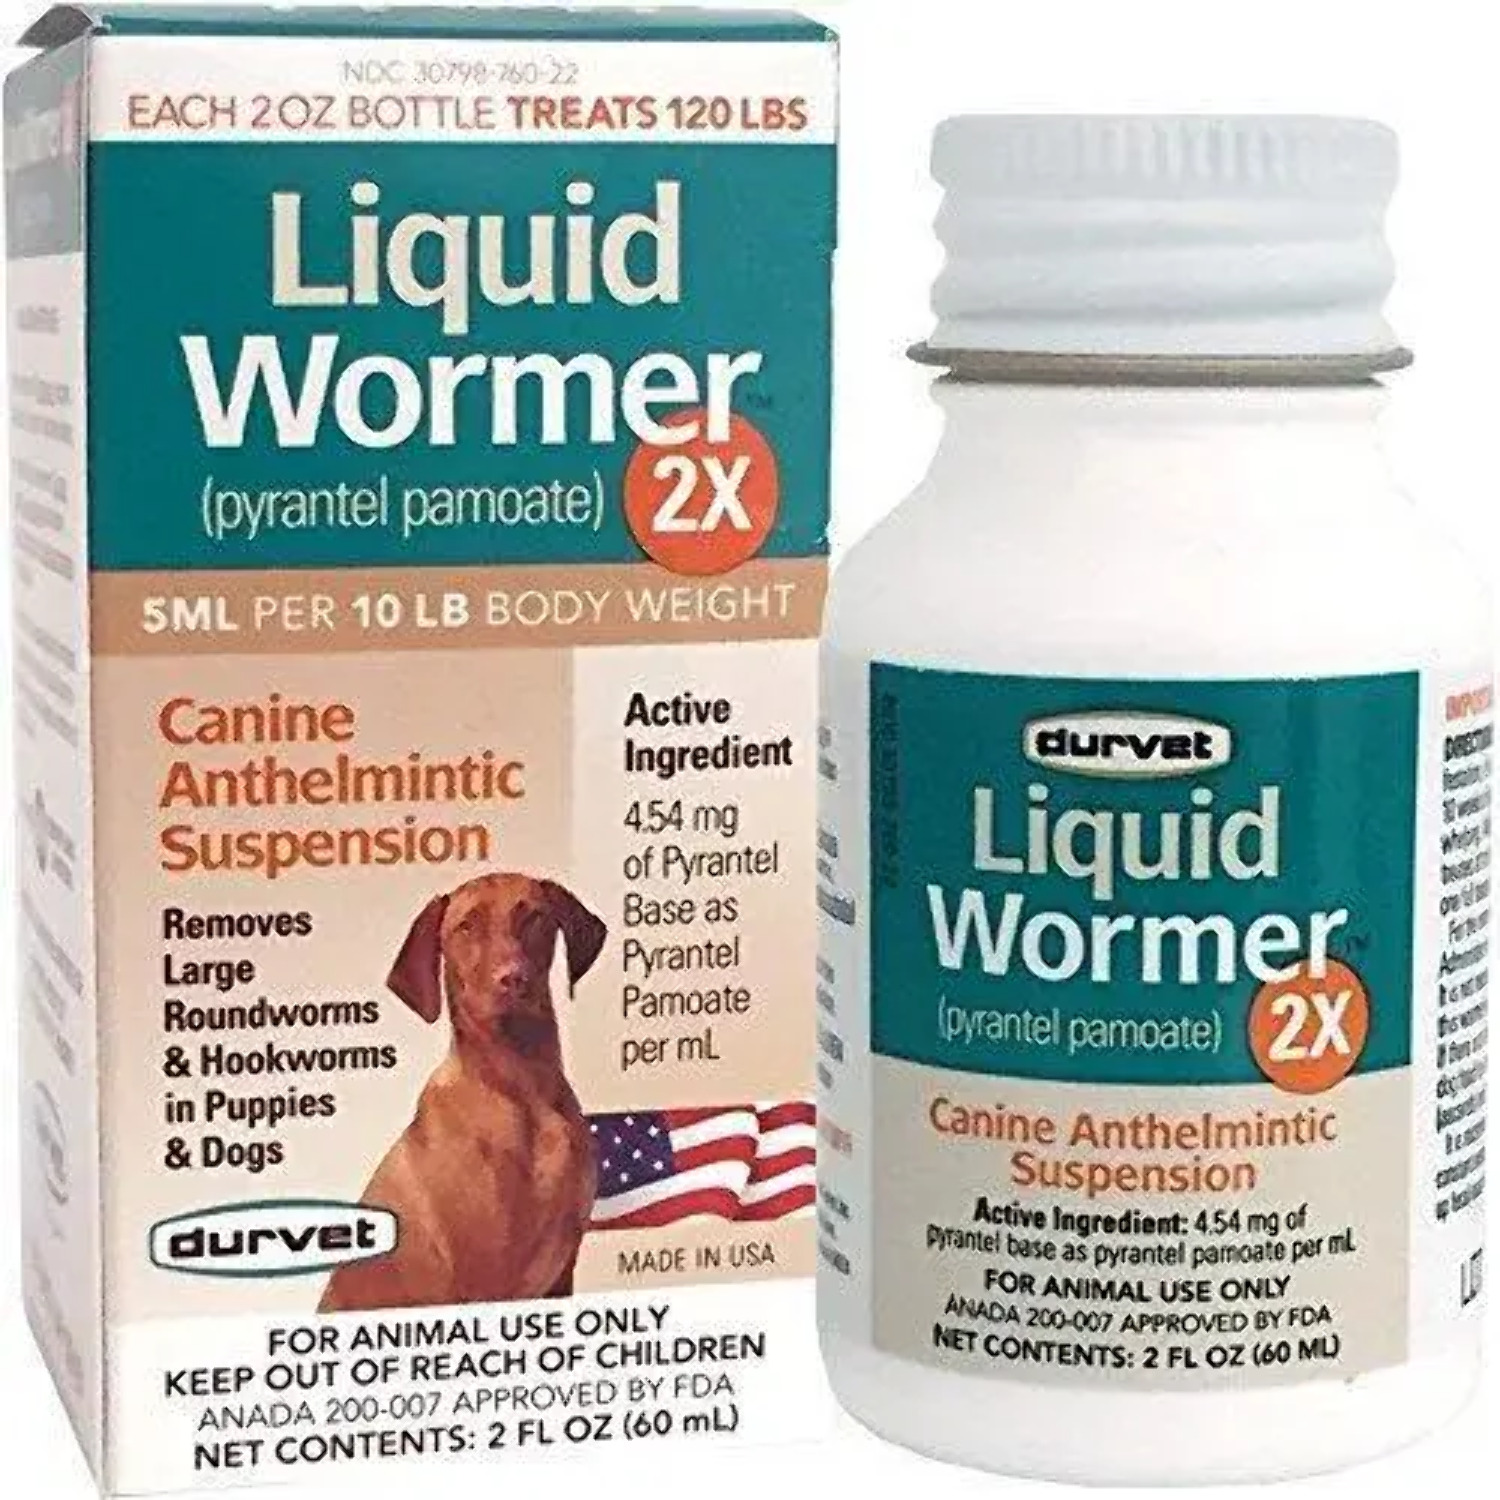 Durvet Liquid Wormer 2x for Puppies and Adult Dogs 2 oz. - image 1 of 3